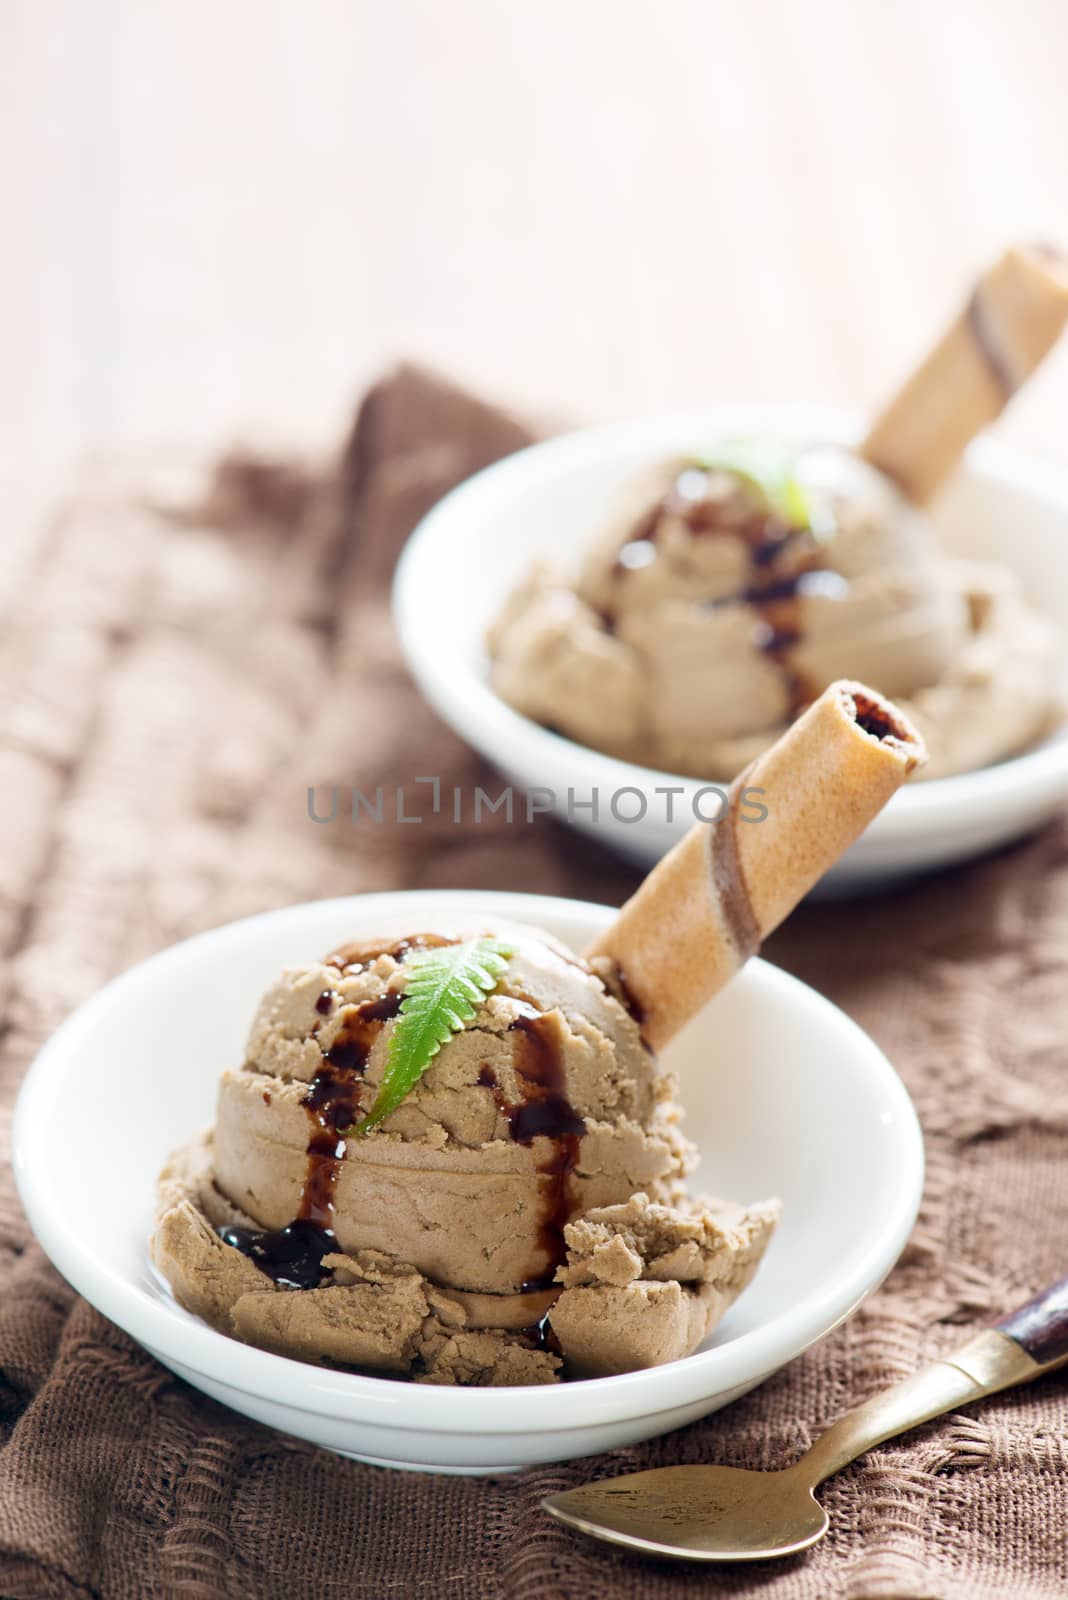 Chocolate ice cream with wafer on plate, table cloth background.